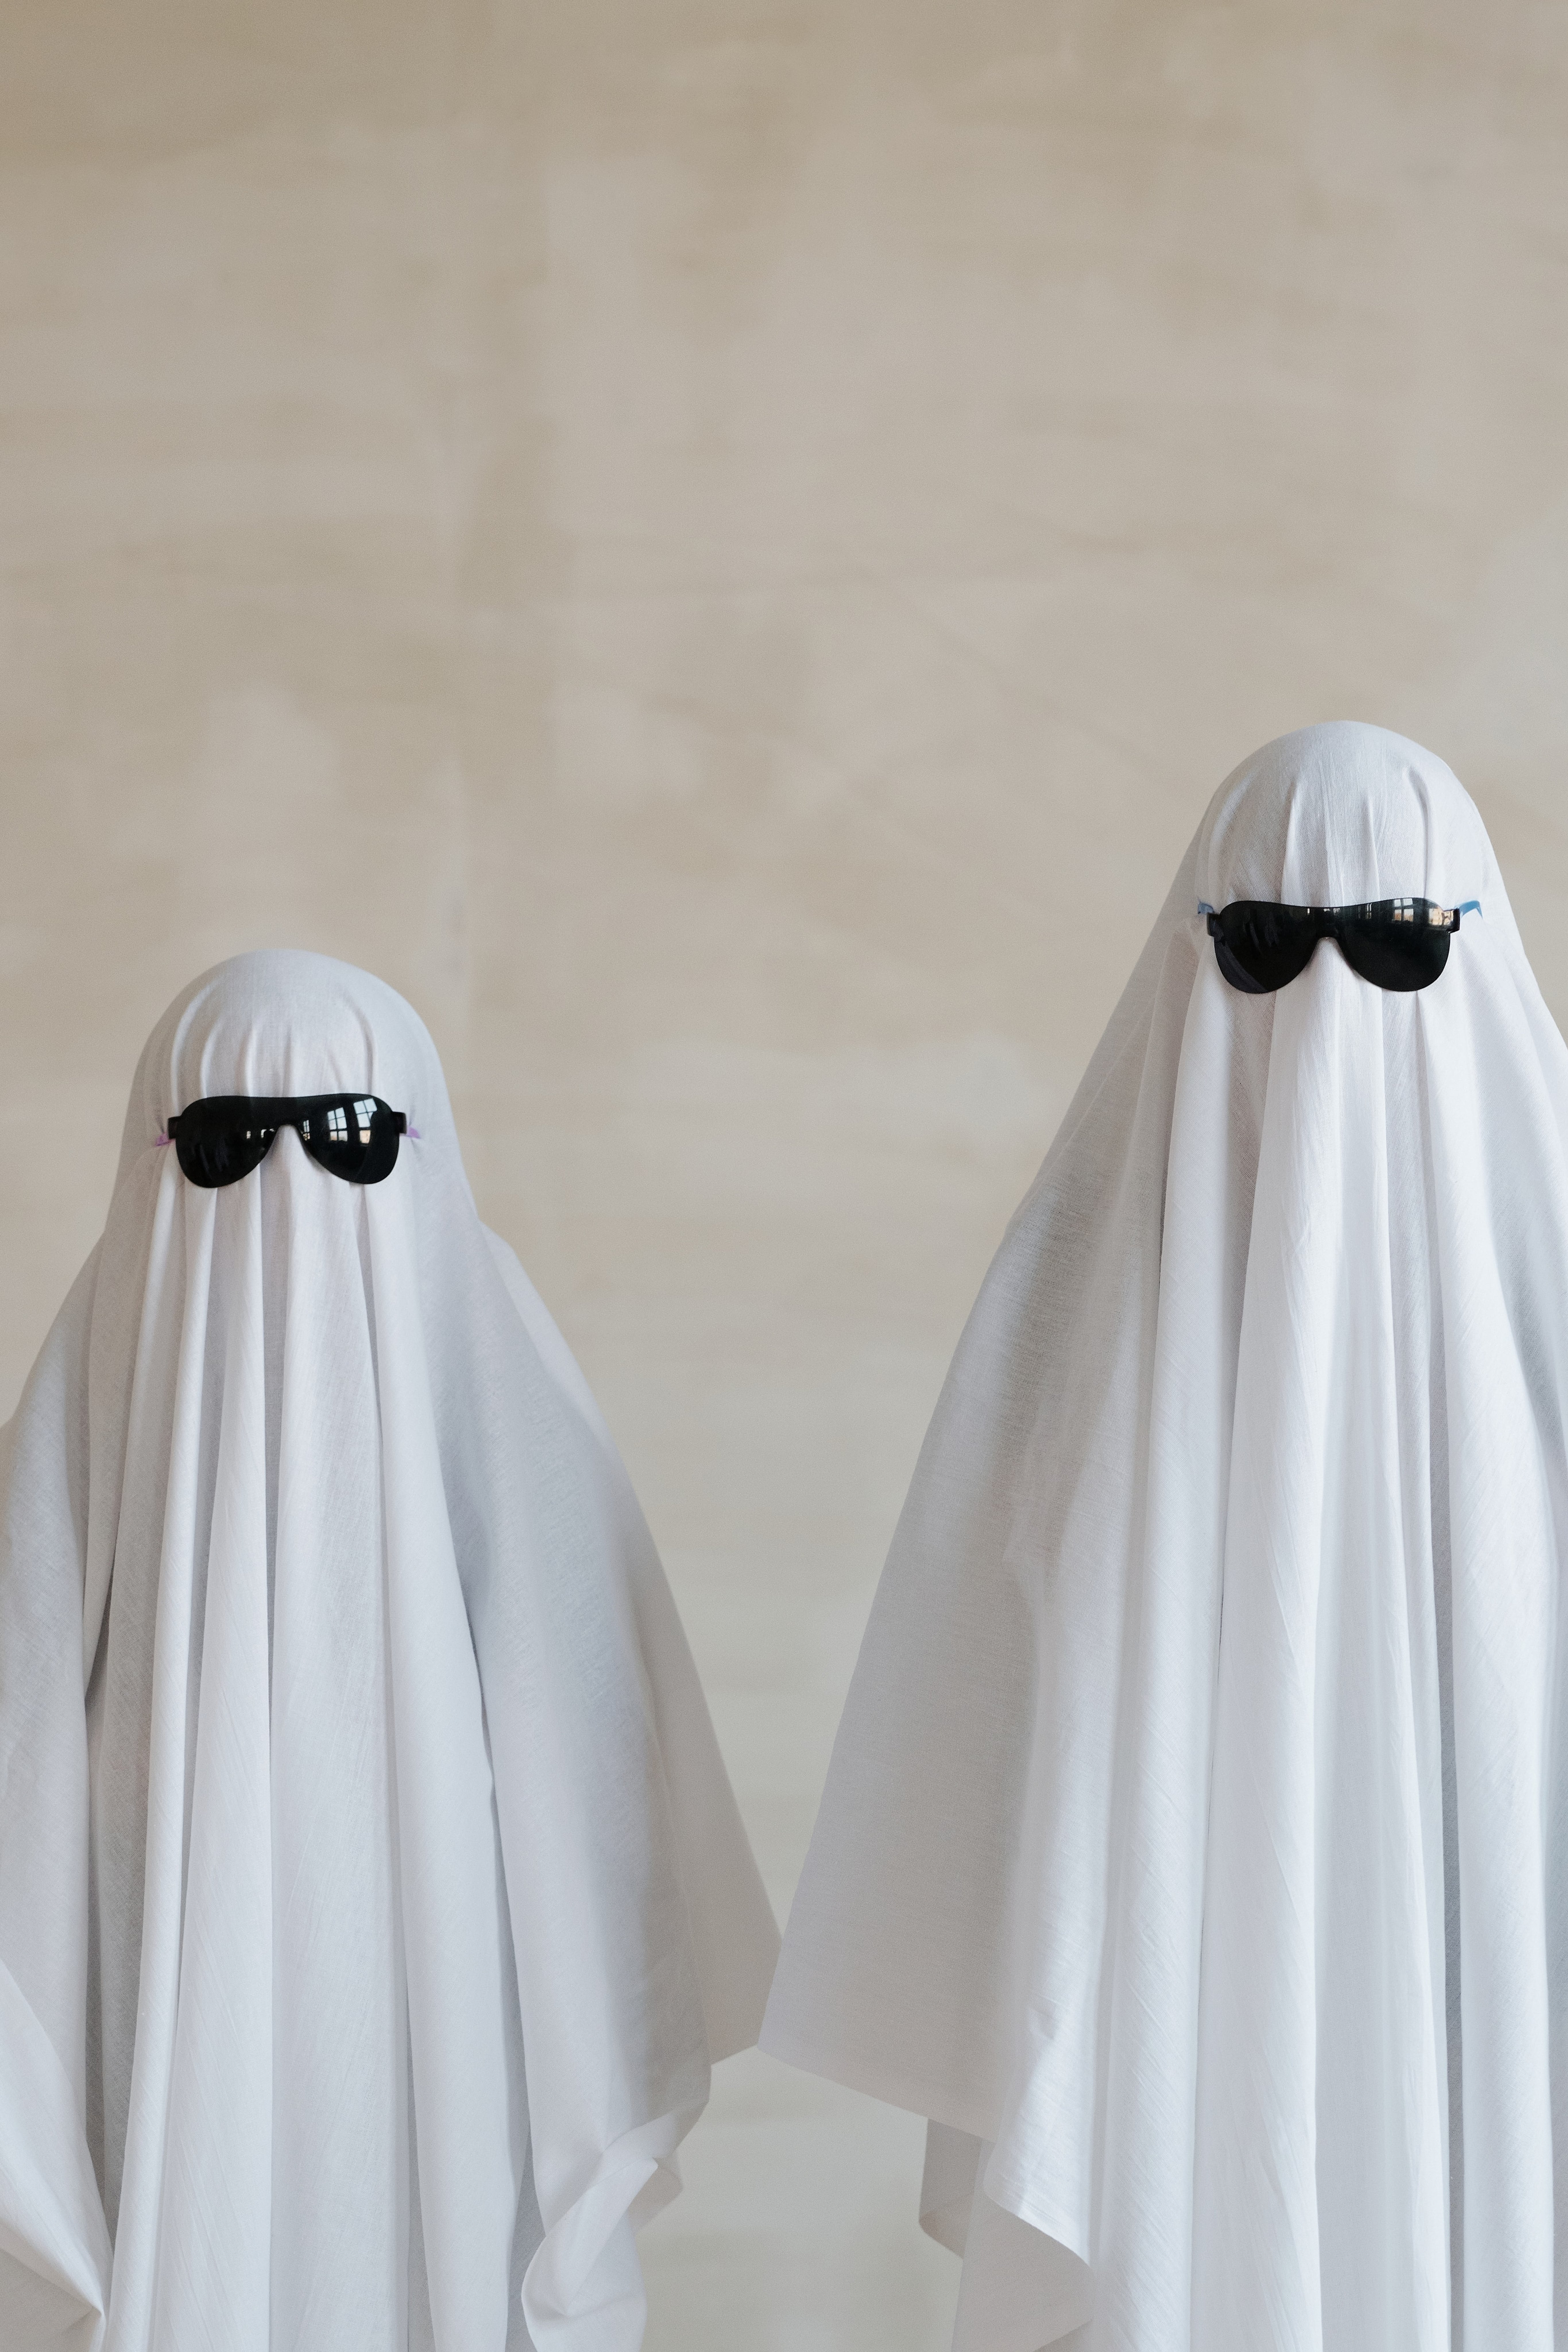 33 Funny Halloween Costumes For Women